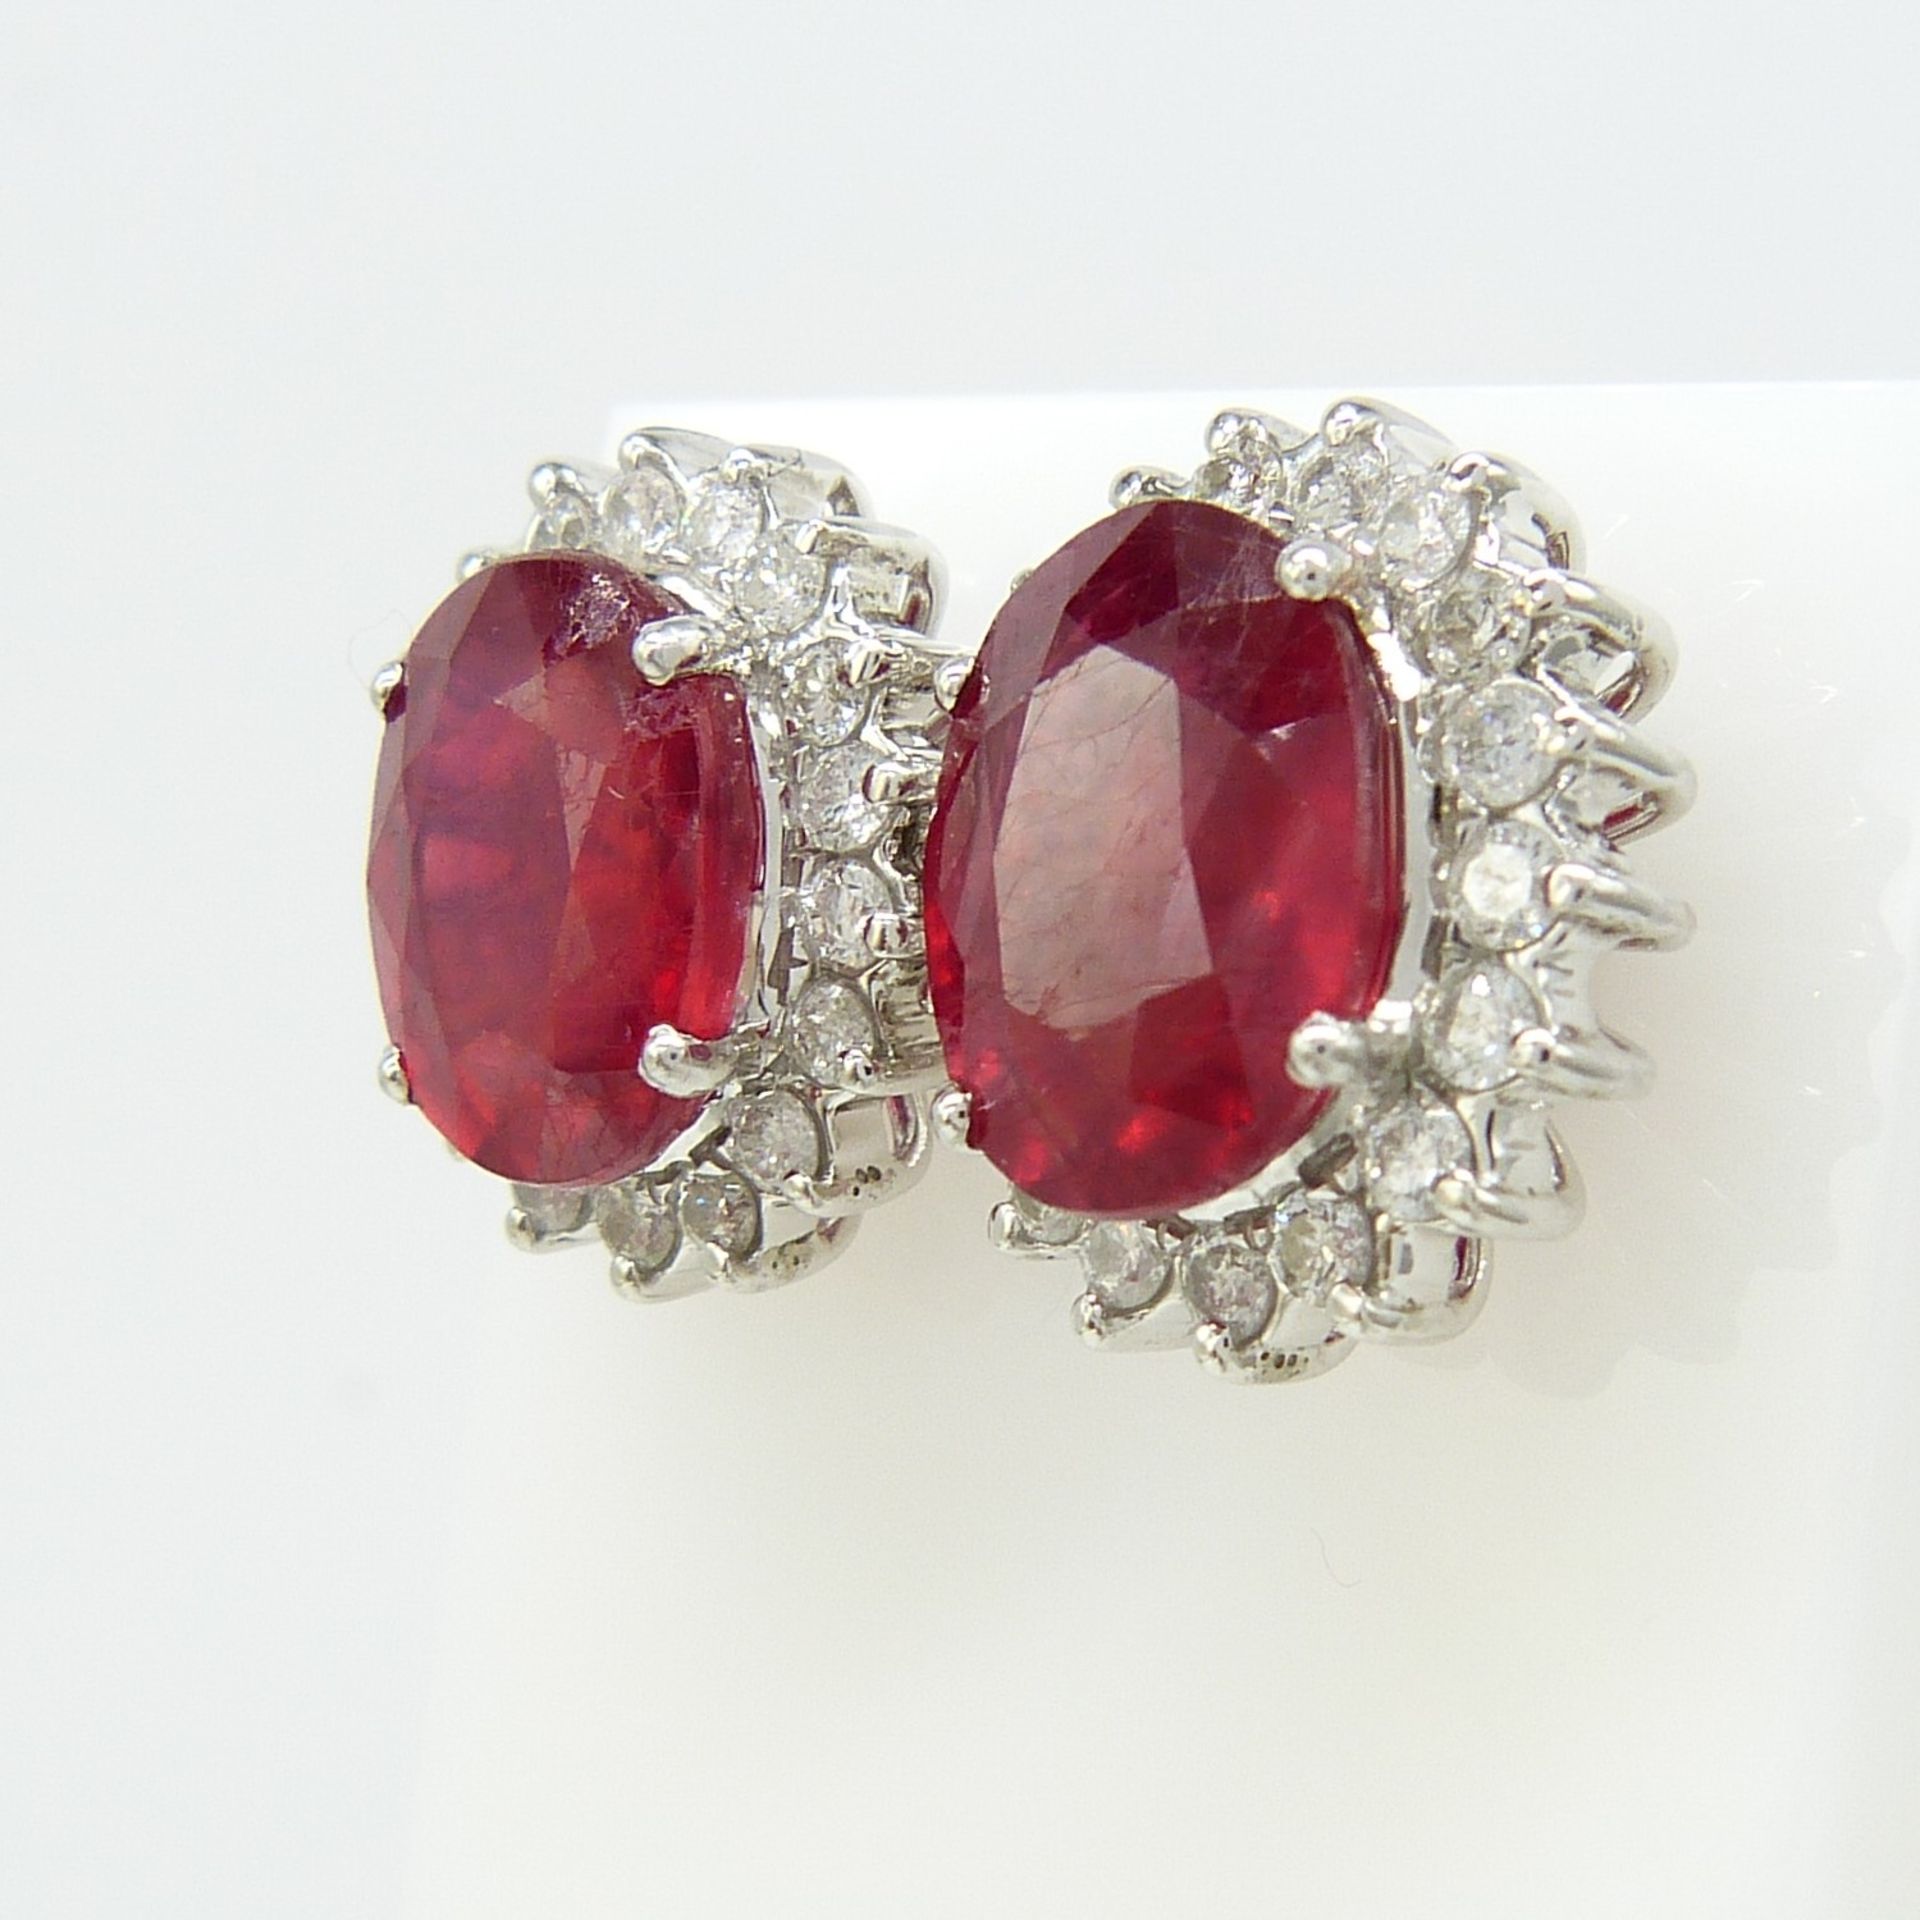 7.50 Carat Ruby and Diamond Cluster Earrings In 18ct White Gold, Boxed - Image 2 of 6